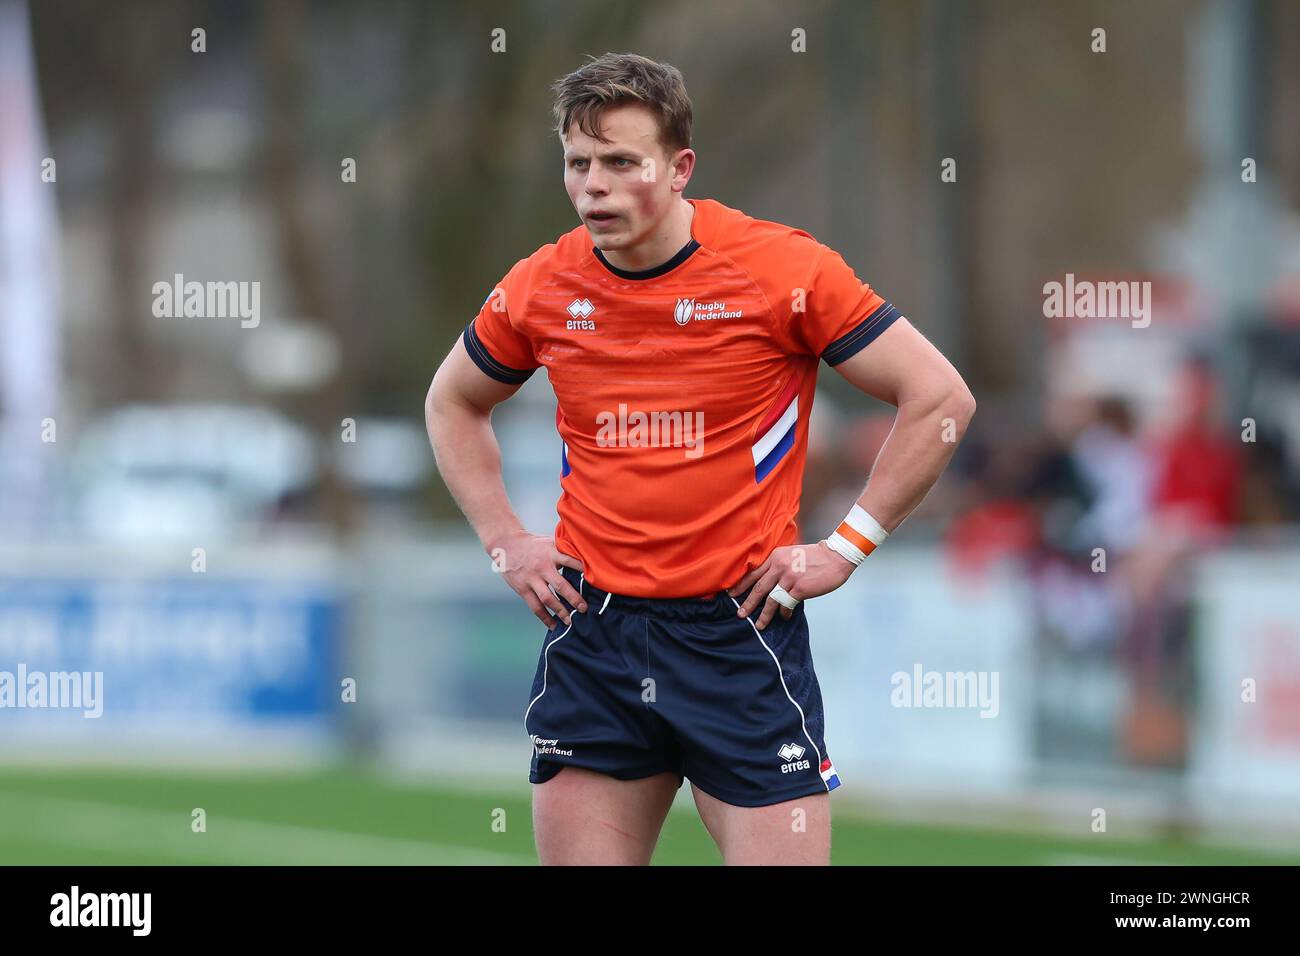 AMSTERDAM, NETHERLANDS - MARCH 02: Siem Noorman player of Haagsche RC  during the international Rugby Europe Championship match between The Netherland Stock Photo